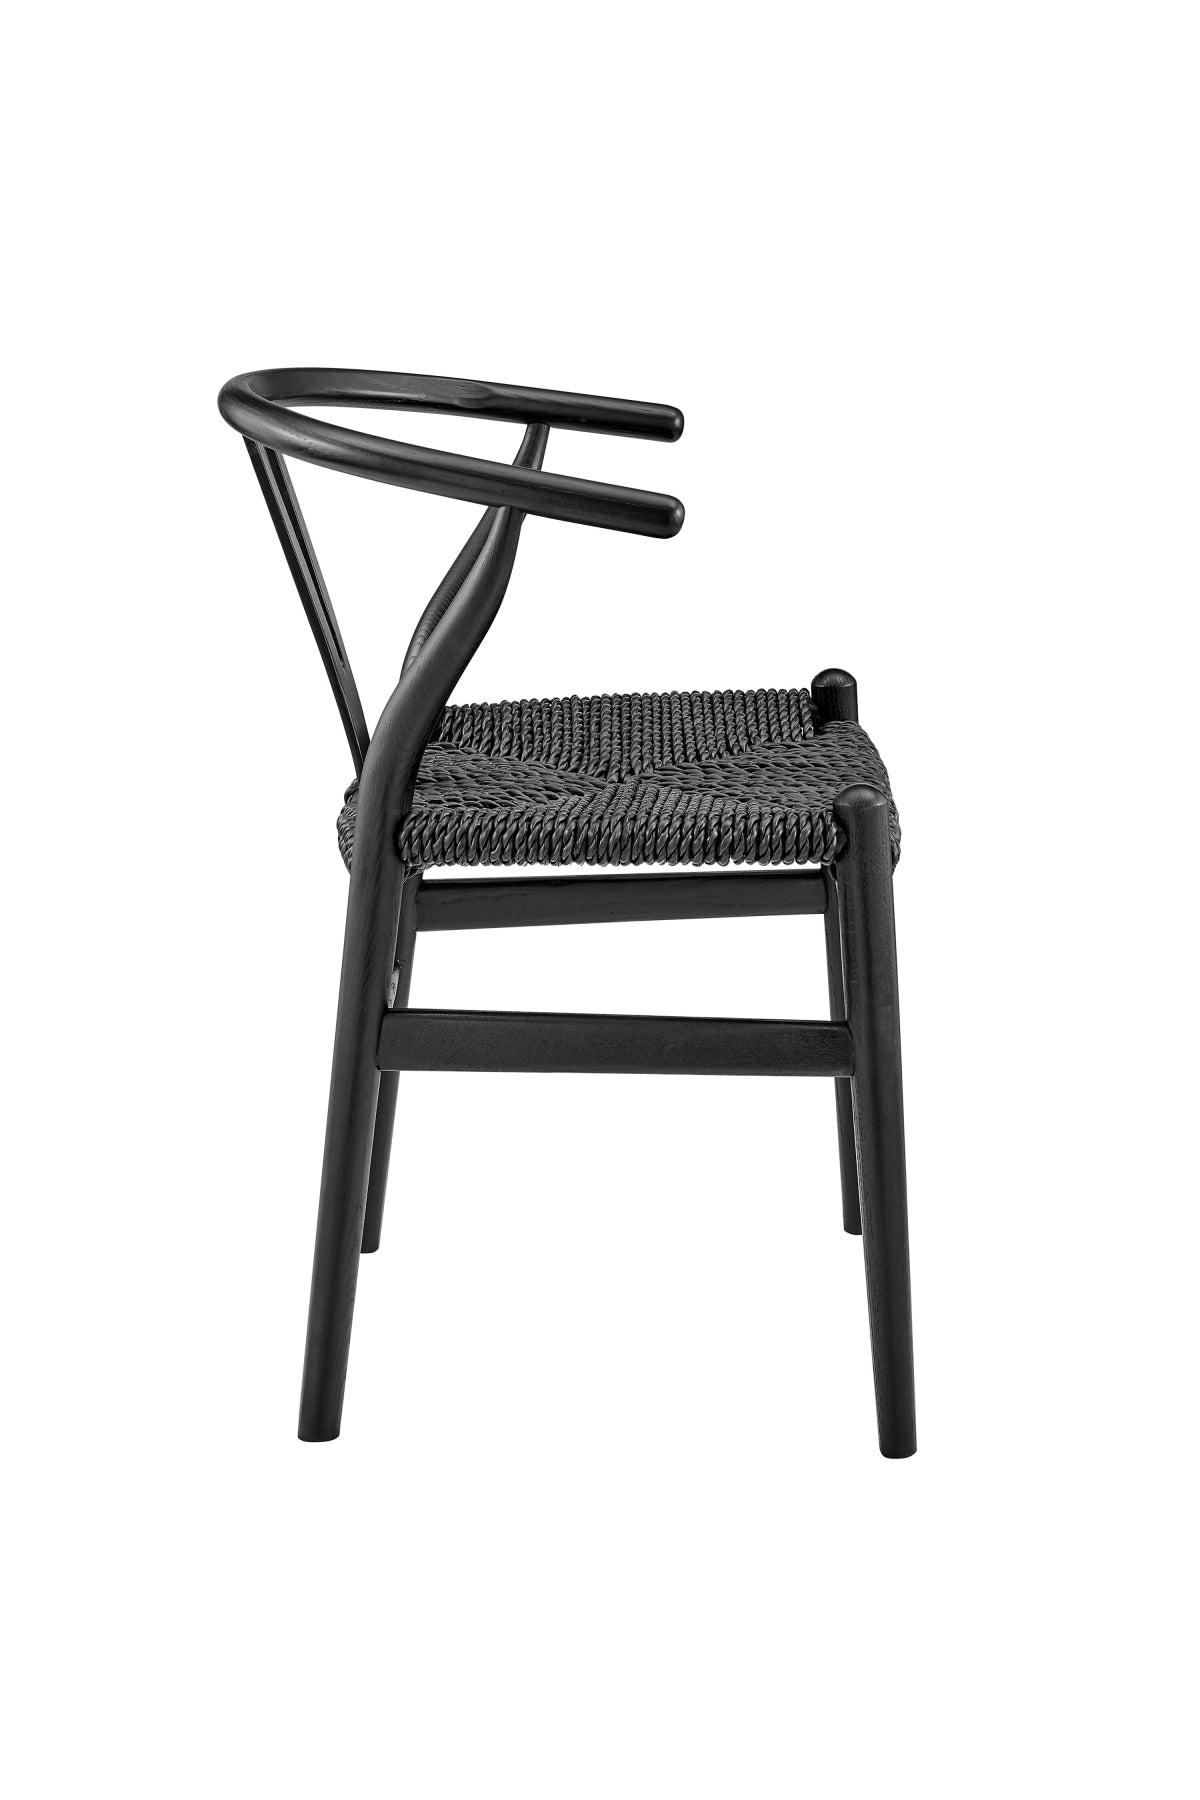 Fowler Outdoor Side Chair - Black - Set of 2